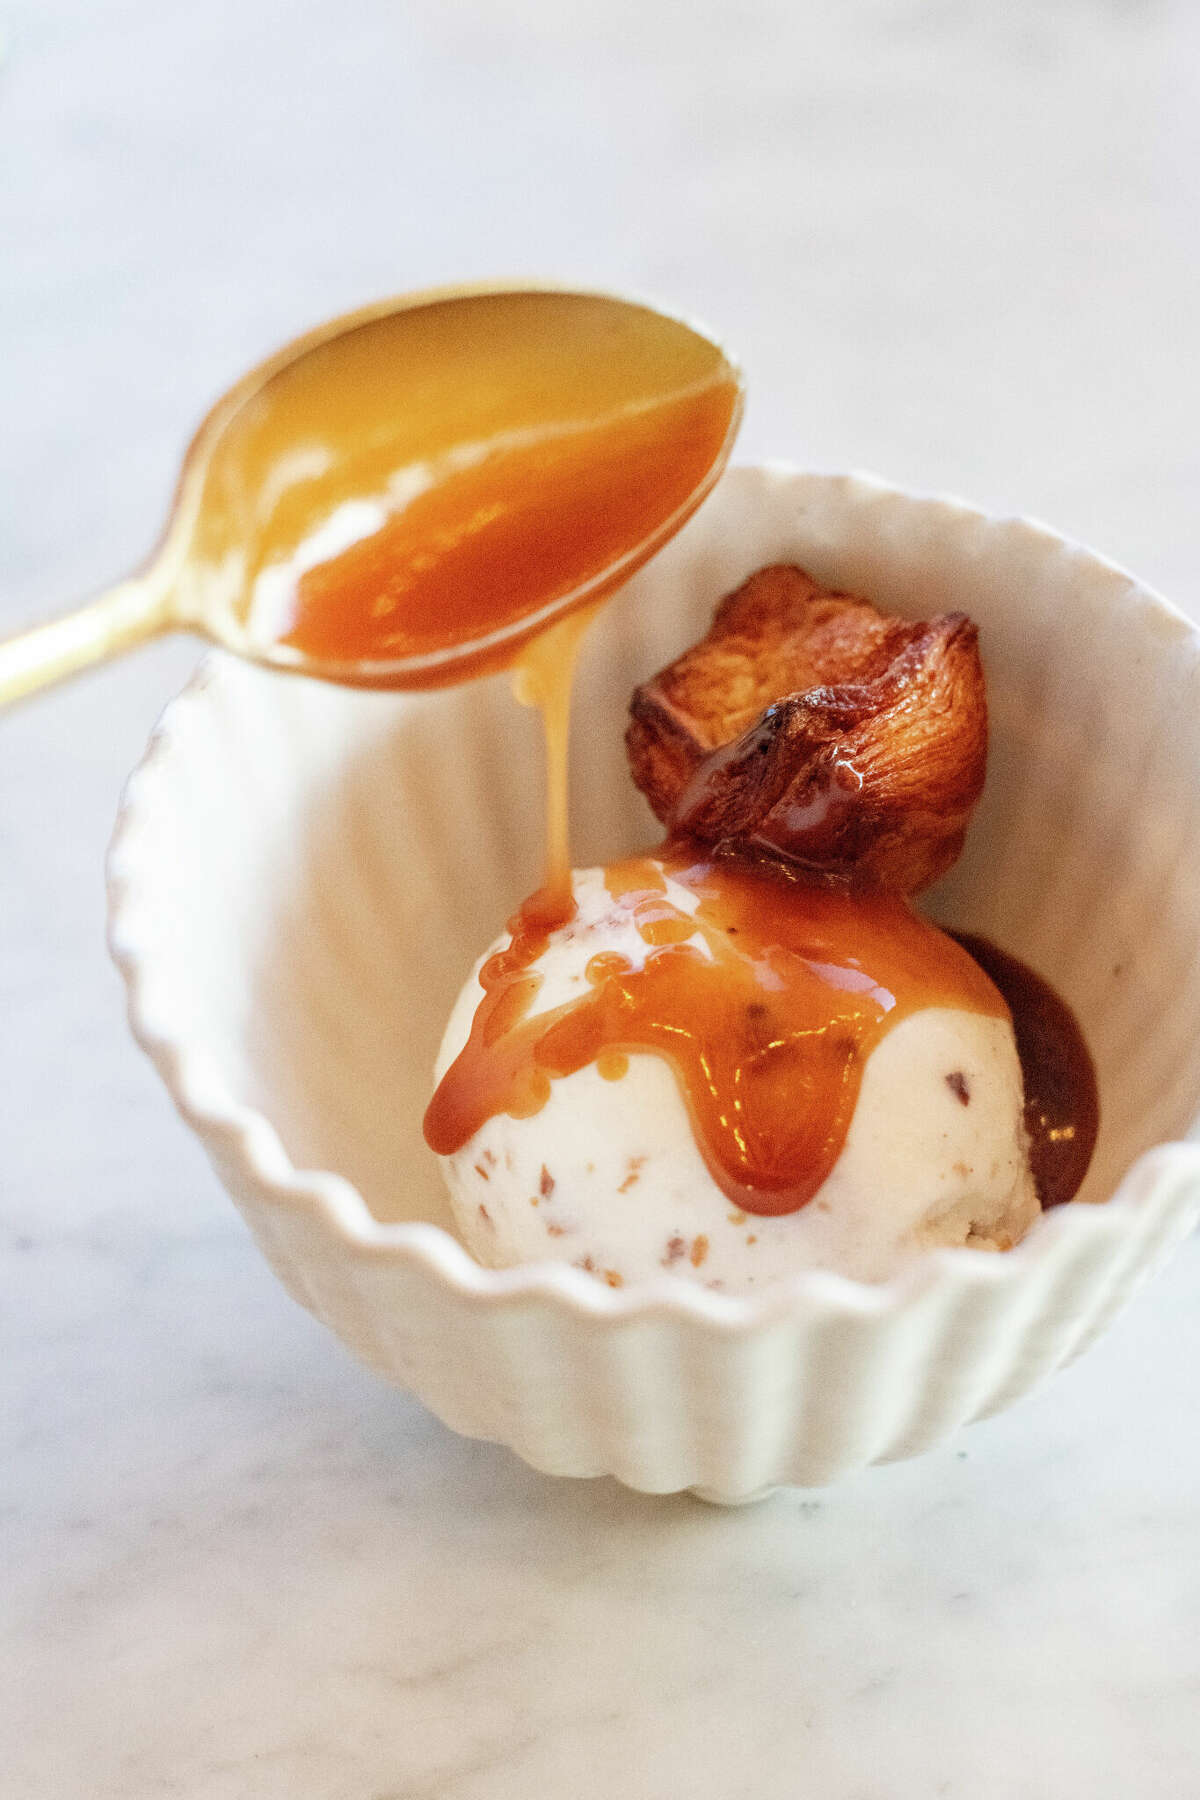 The highlight of the dessert menu at Lutie's Garden Restaurant is the kouign-amann ice cream. Handmade by executive pastry chef Susana Querejazu, the kouign-amann is a French pastry broken into pieces and folded into vanilla ice cream and served with warm caramel sauce at the table. 